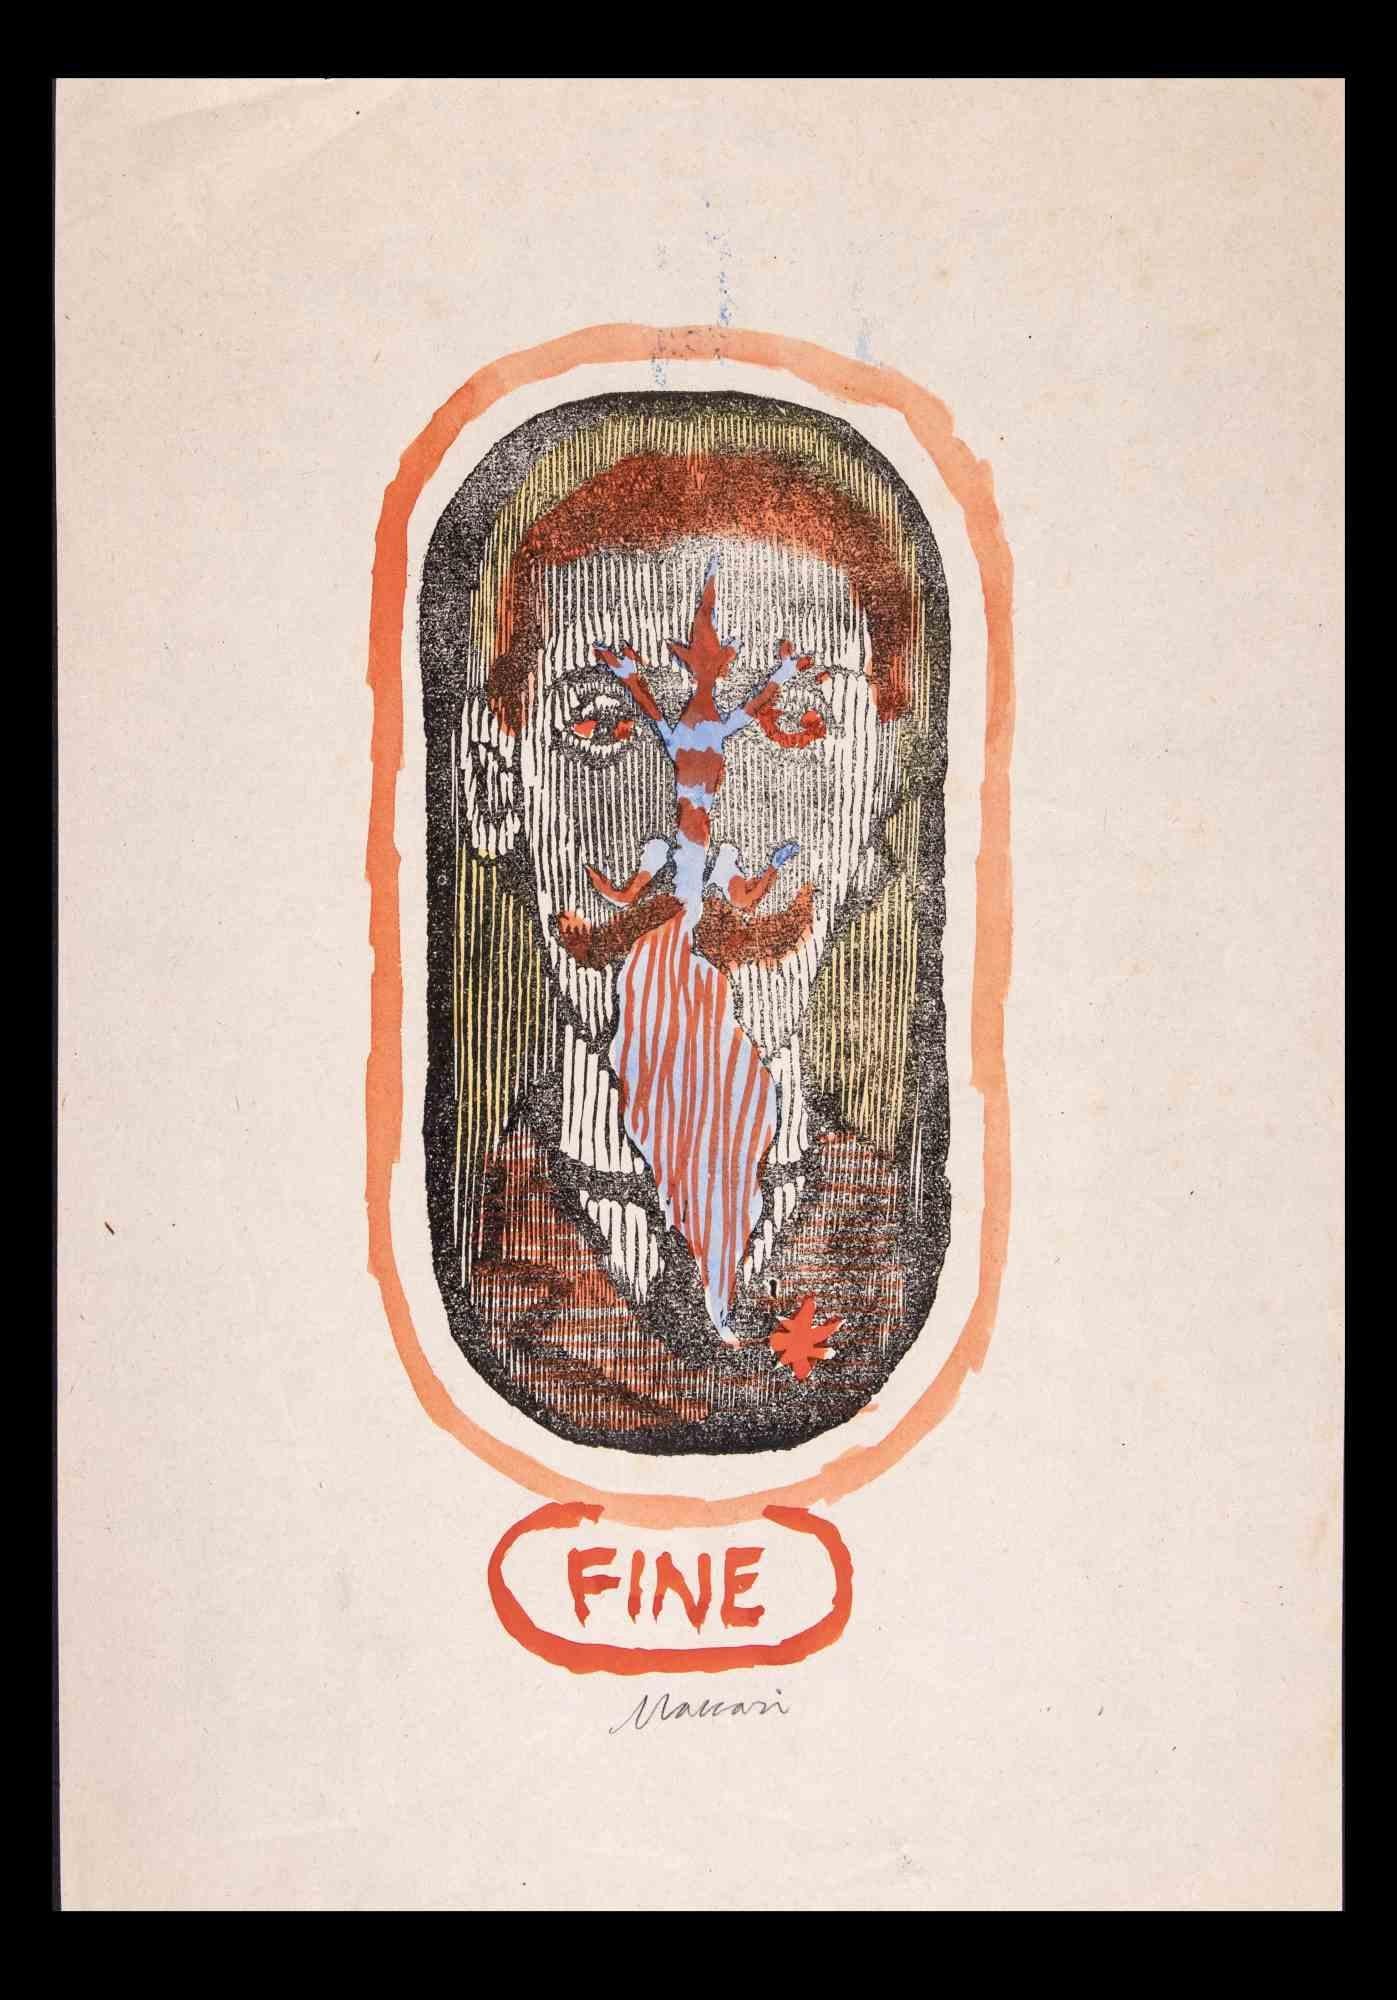 Portrait. The End is a Watercolor on woodcut print realized by Mino Maccari  (1924-1989) in 1965.

Hand signed on the lower margin.

Good condition on a yellowed paper.

Mino Maccari (Siena, 1924-Rome, June 16, 1989) was an Italian writer, painter,